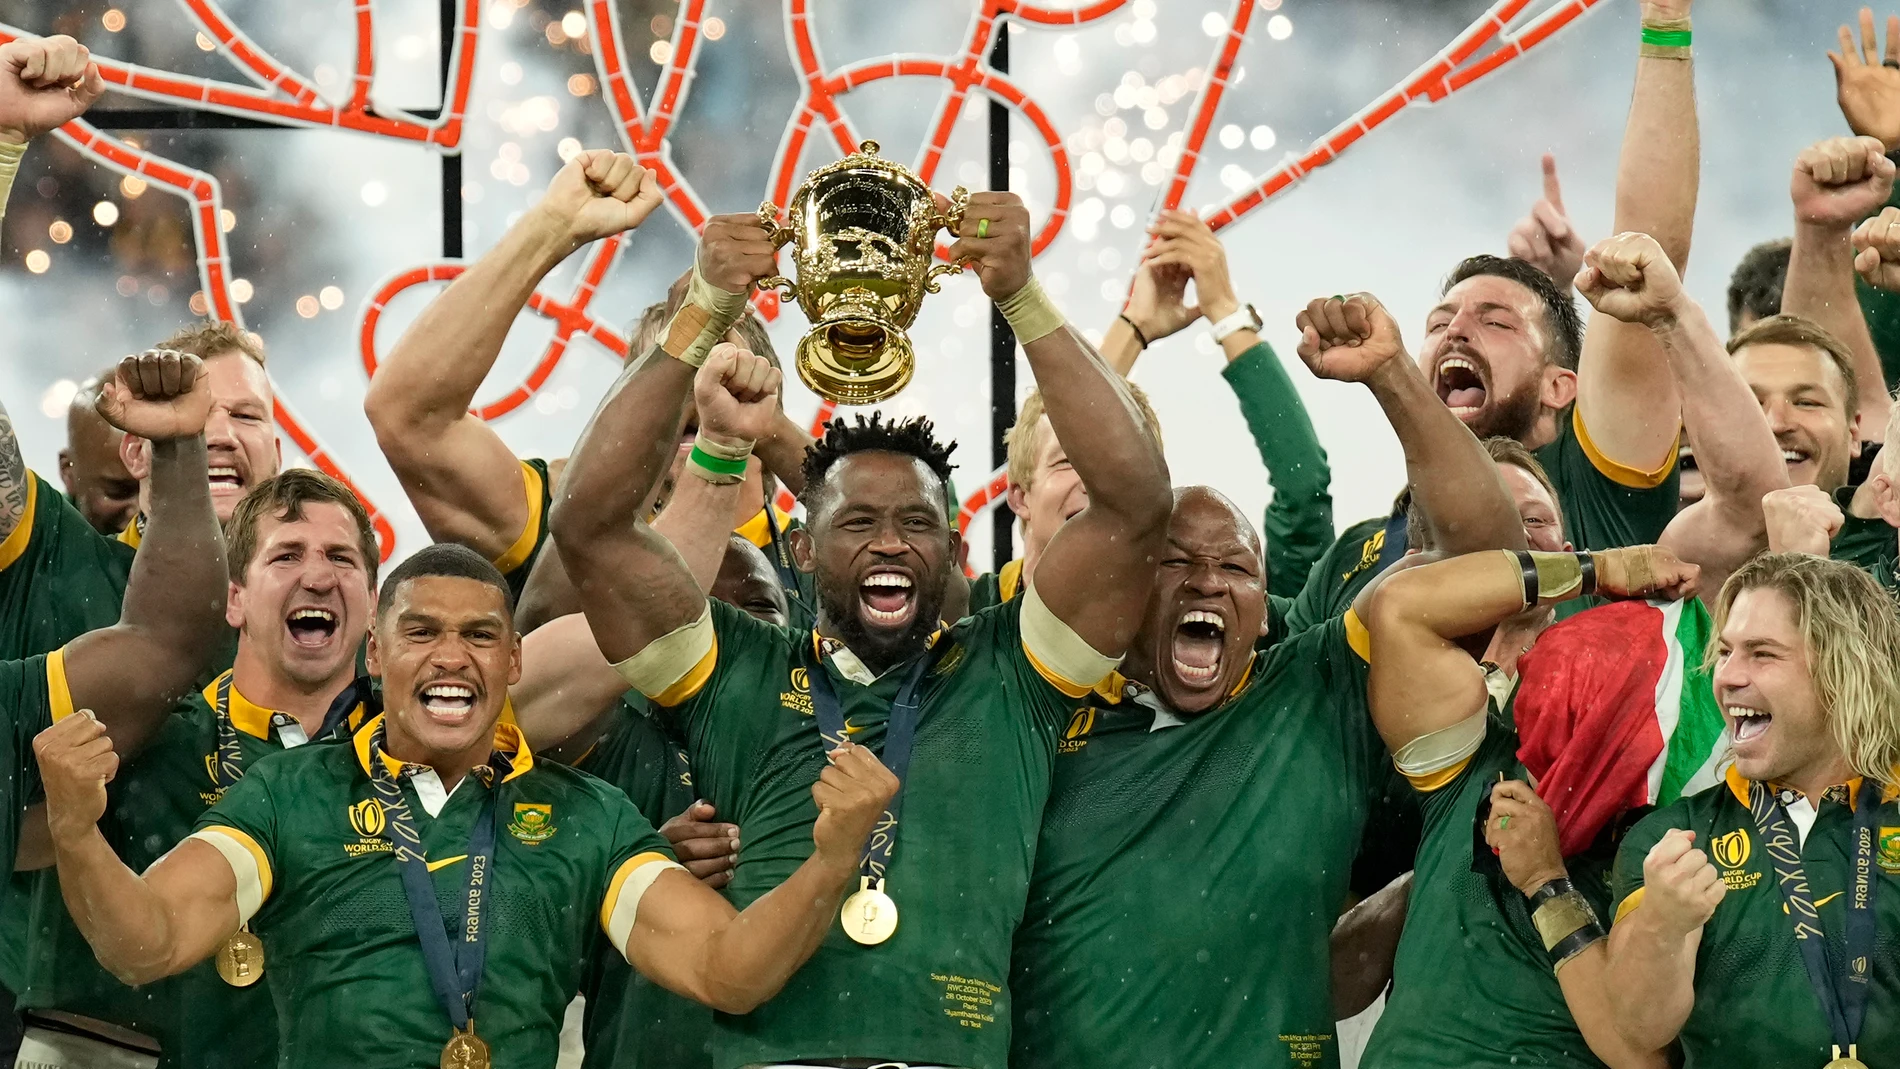 South Africa's Siya Kolisi lifts the trophy as teammates celebrate after they won the Rugby World Cup final match between New Zealand and South Africa at the Stade de France in Saint-Denis, near Paris Saturday, Oct. 28, 2023. South Africa won the game 12-11. (AP Photo/Christophe Ena)